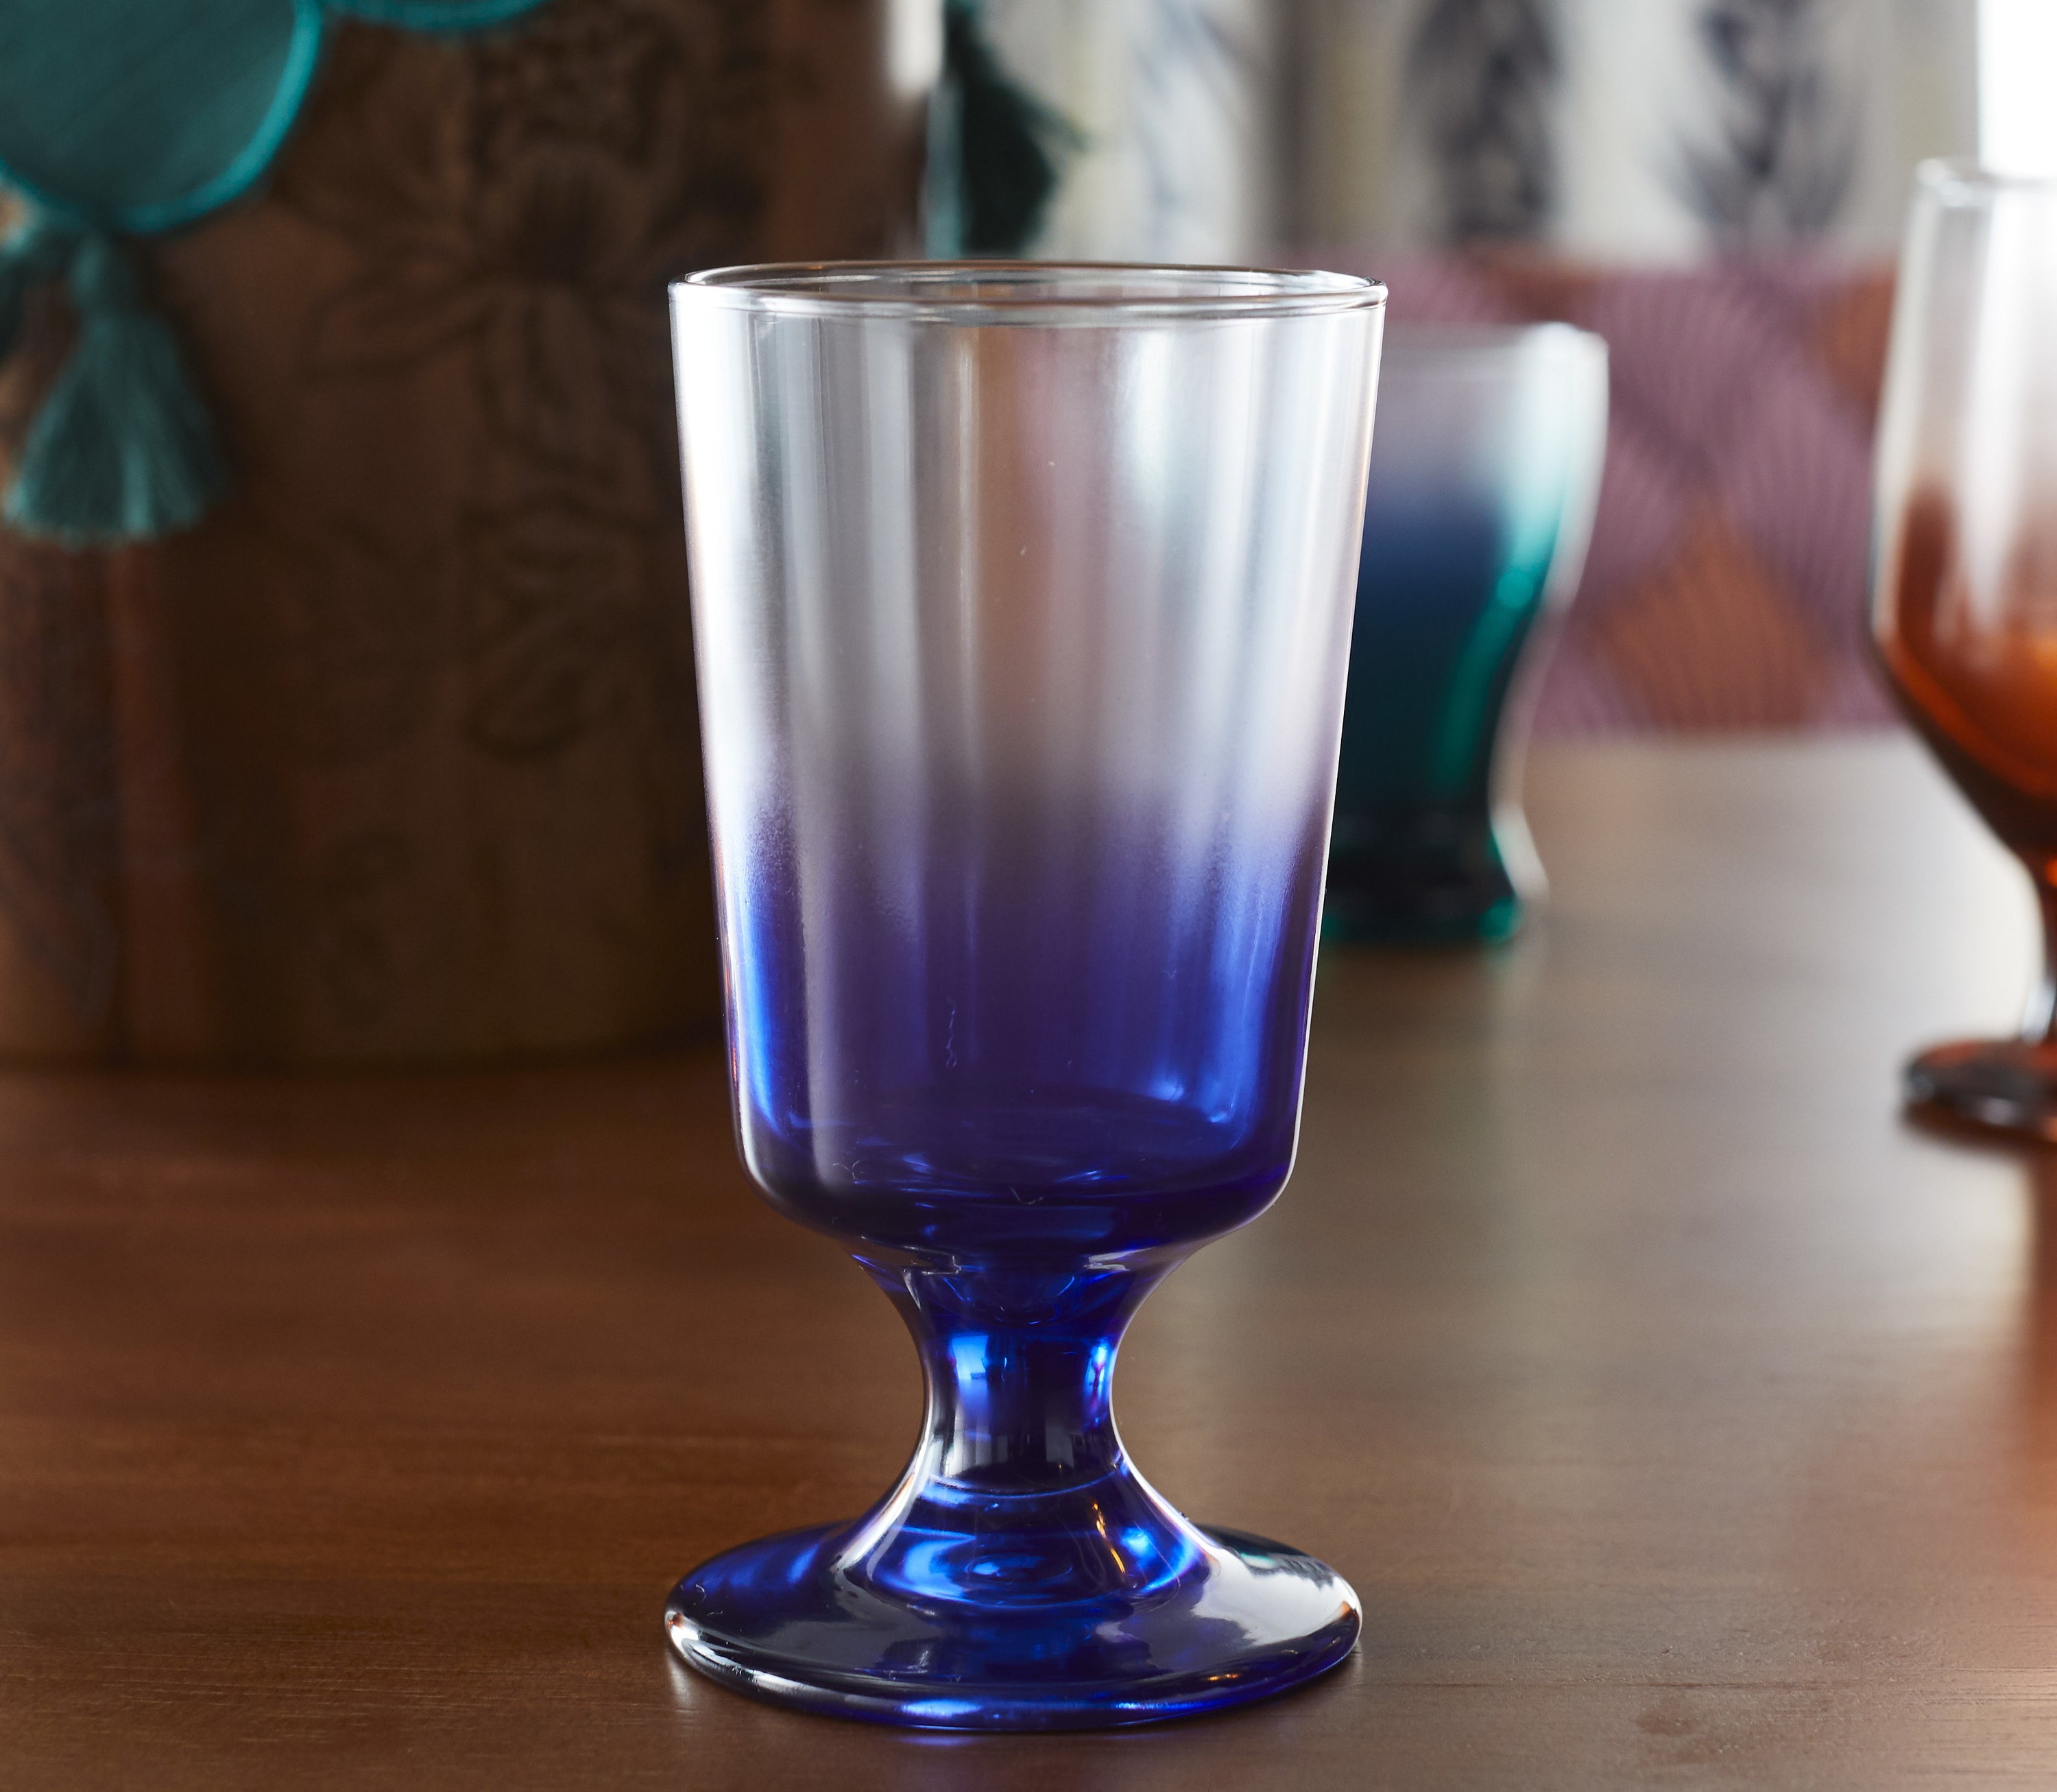 the blue glass